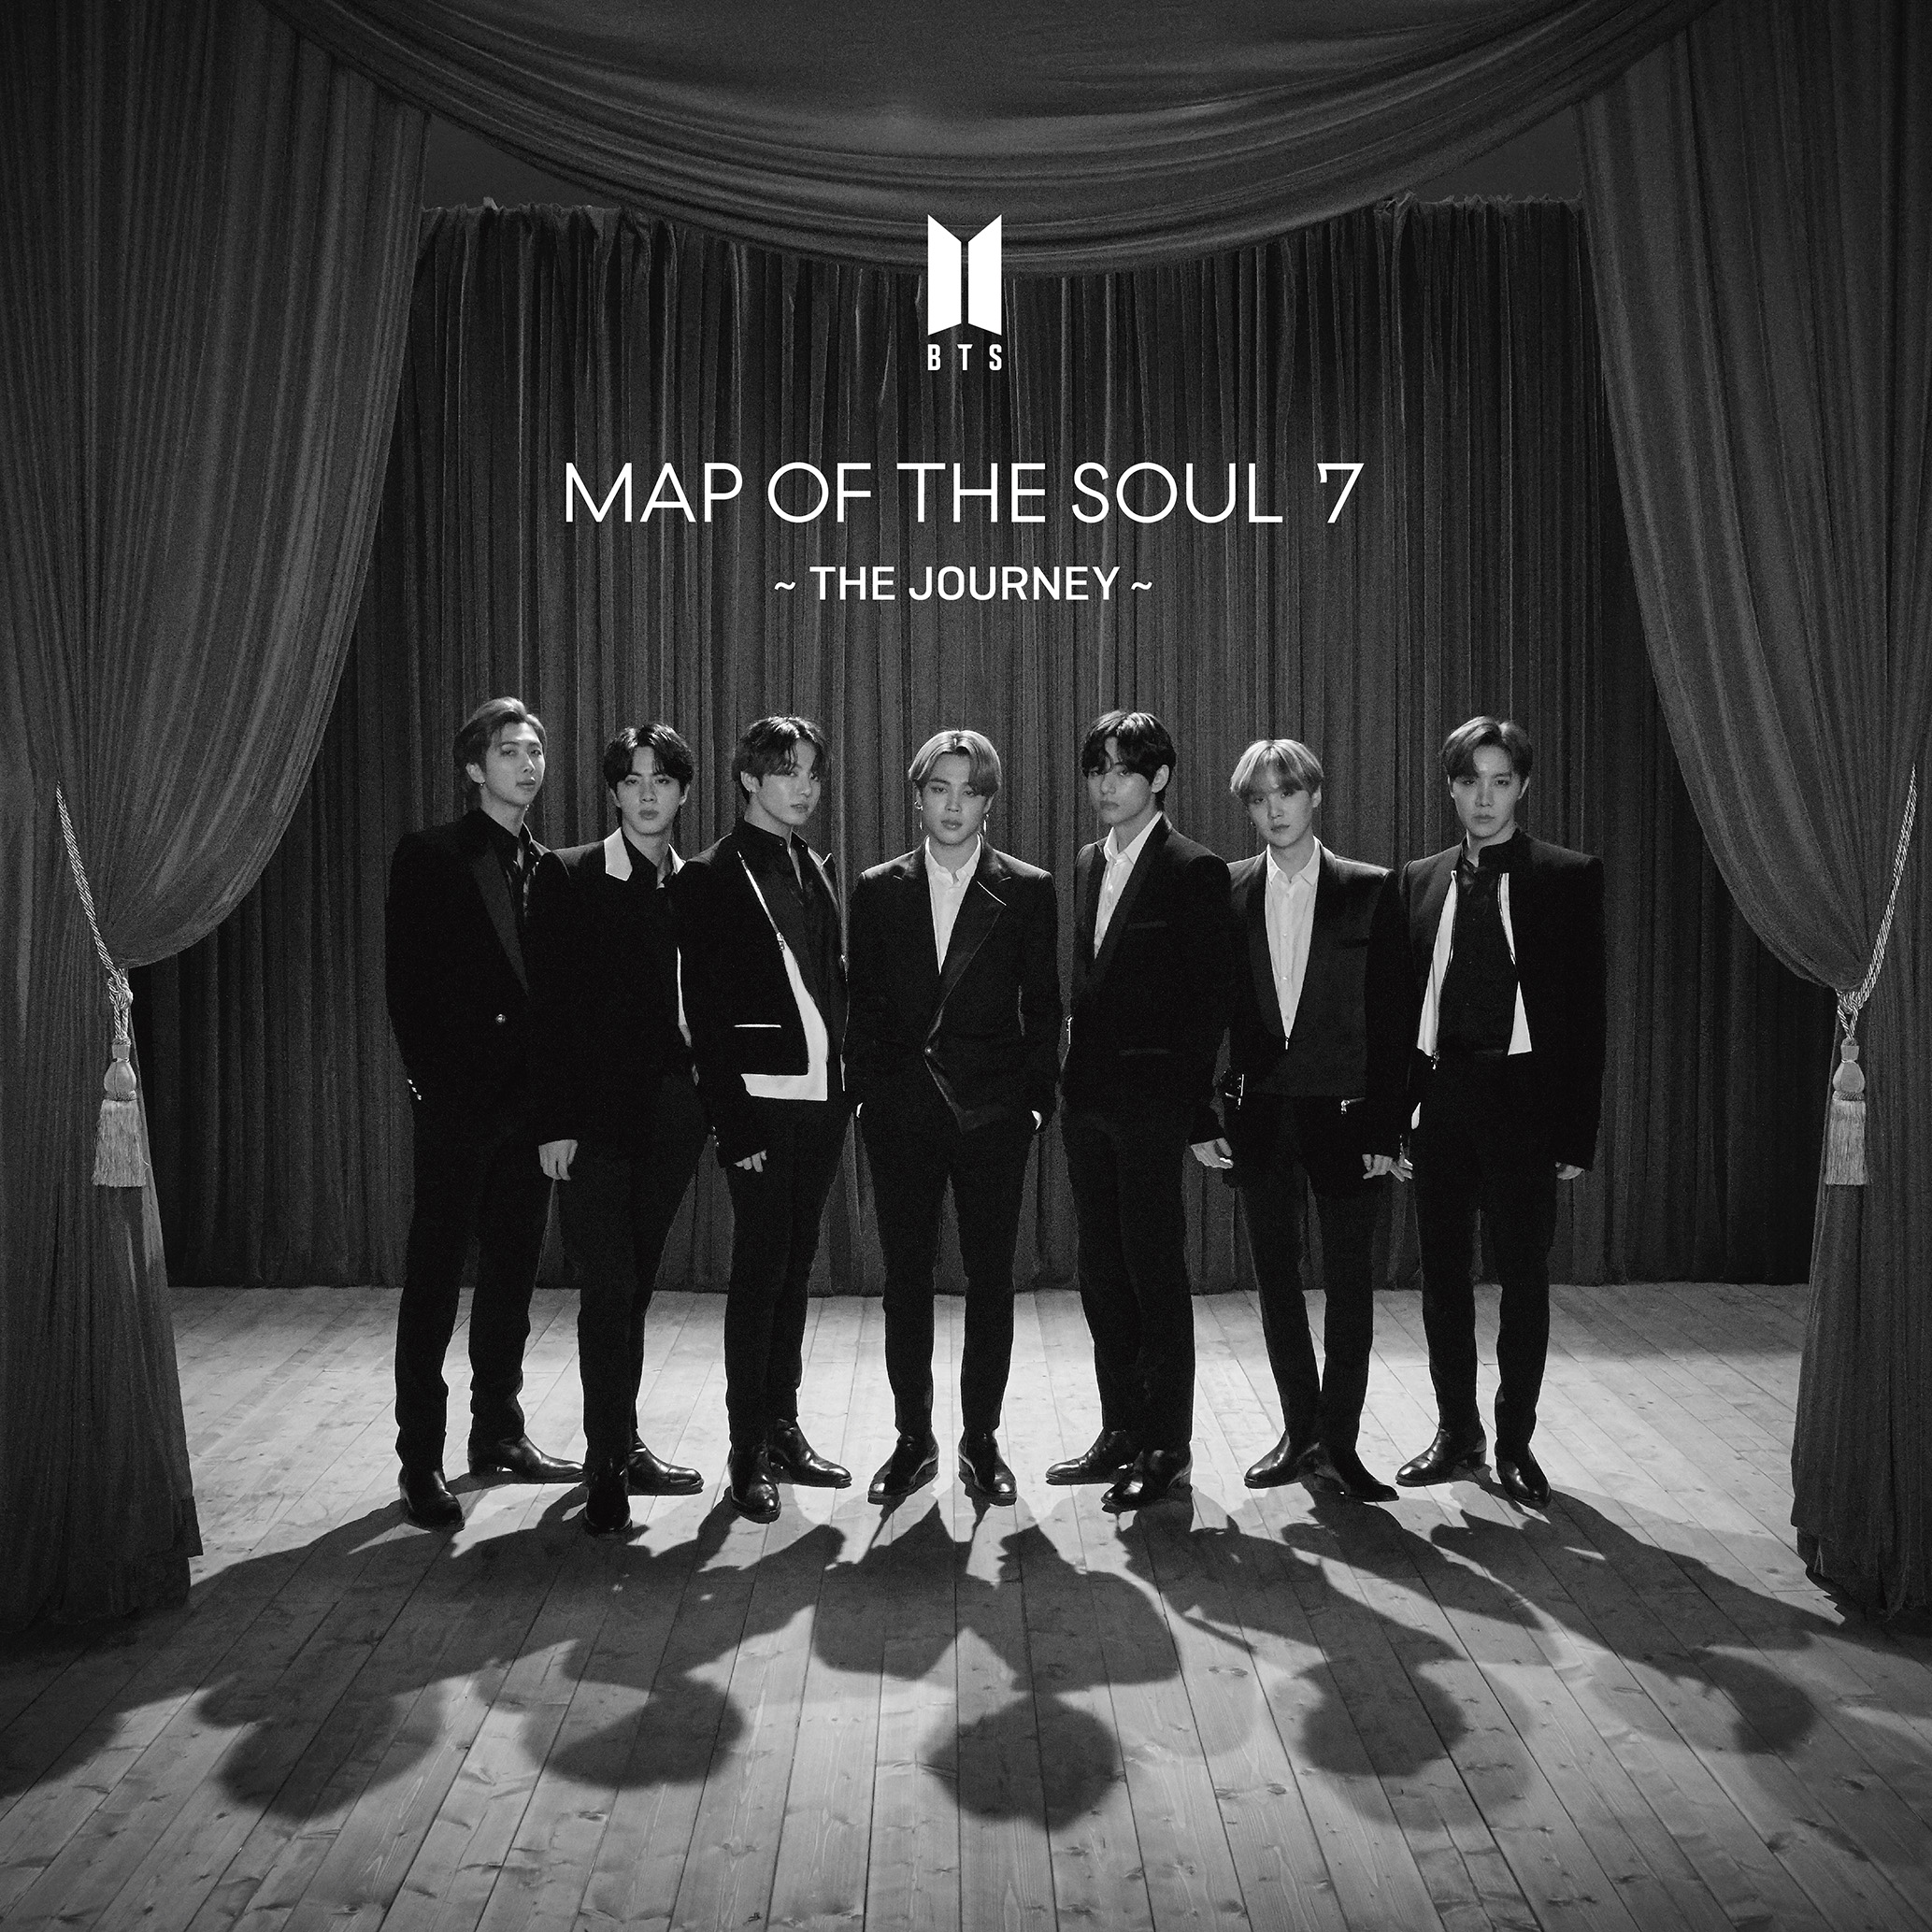 BTS MAP OF THE SOUL ~THE JOURNEY~